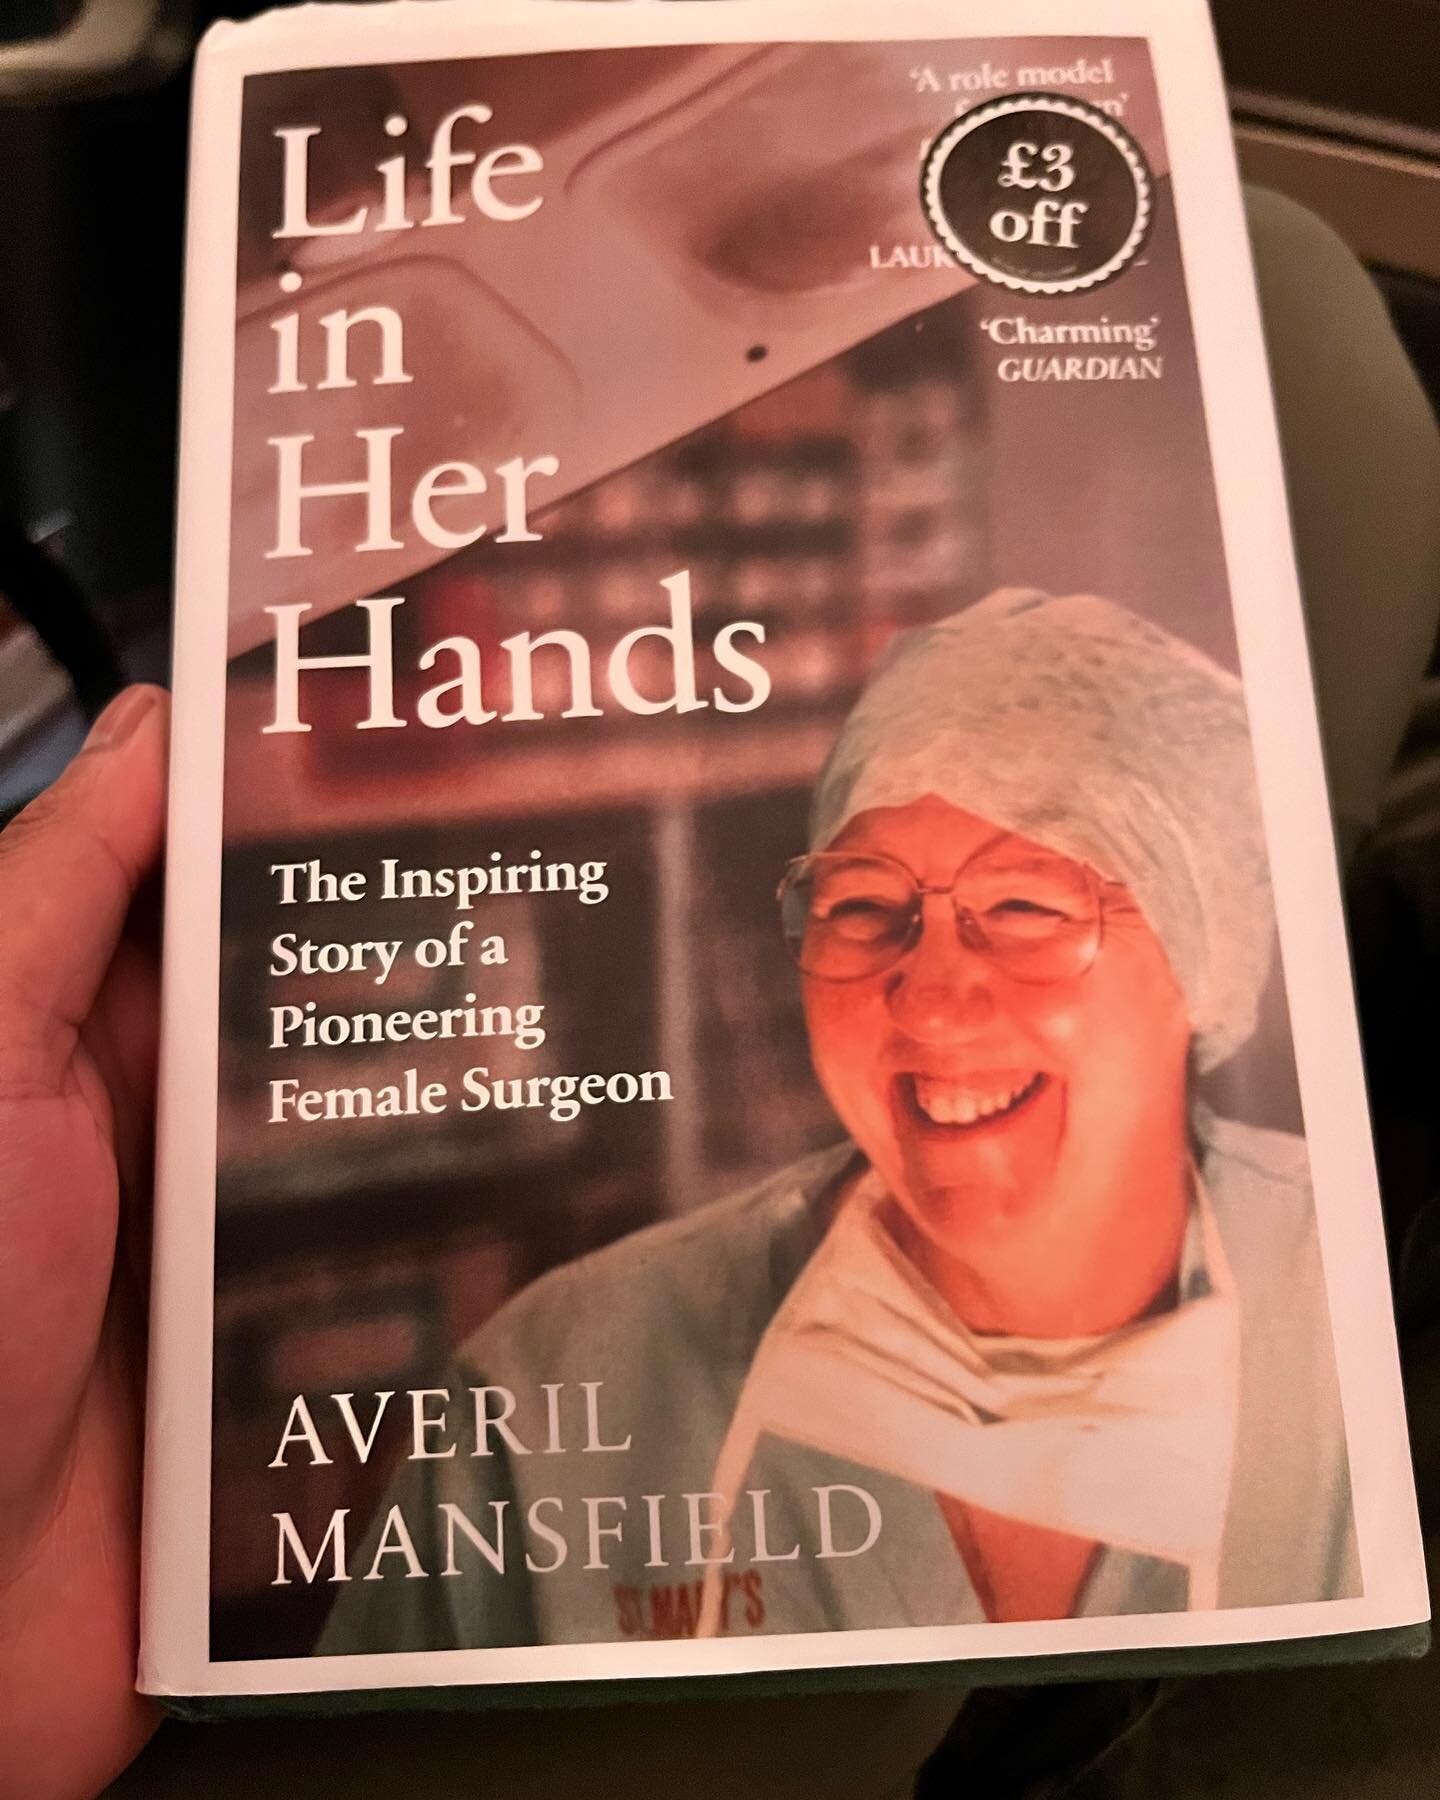 A great read while travelling home. I was inspired to learn how Dr Mansfield rose to the top in a male dominated field but also how she forged a new path in the specialisation of vascular surgery away from general surgery. I feel that endometriosis s